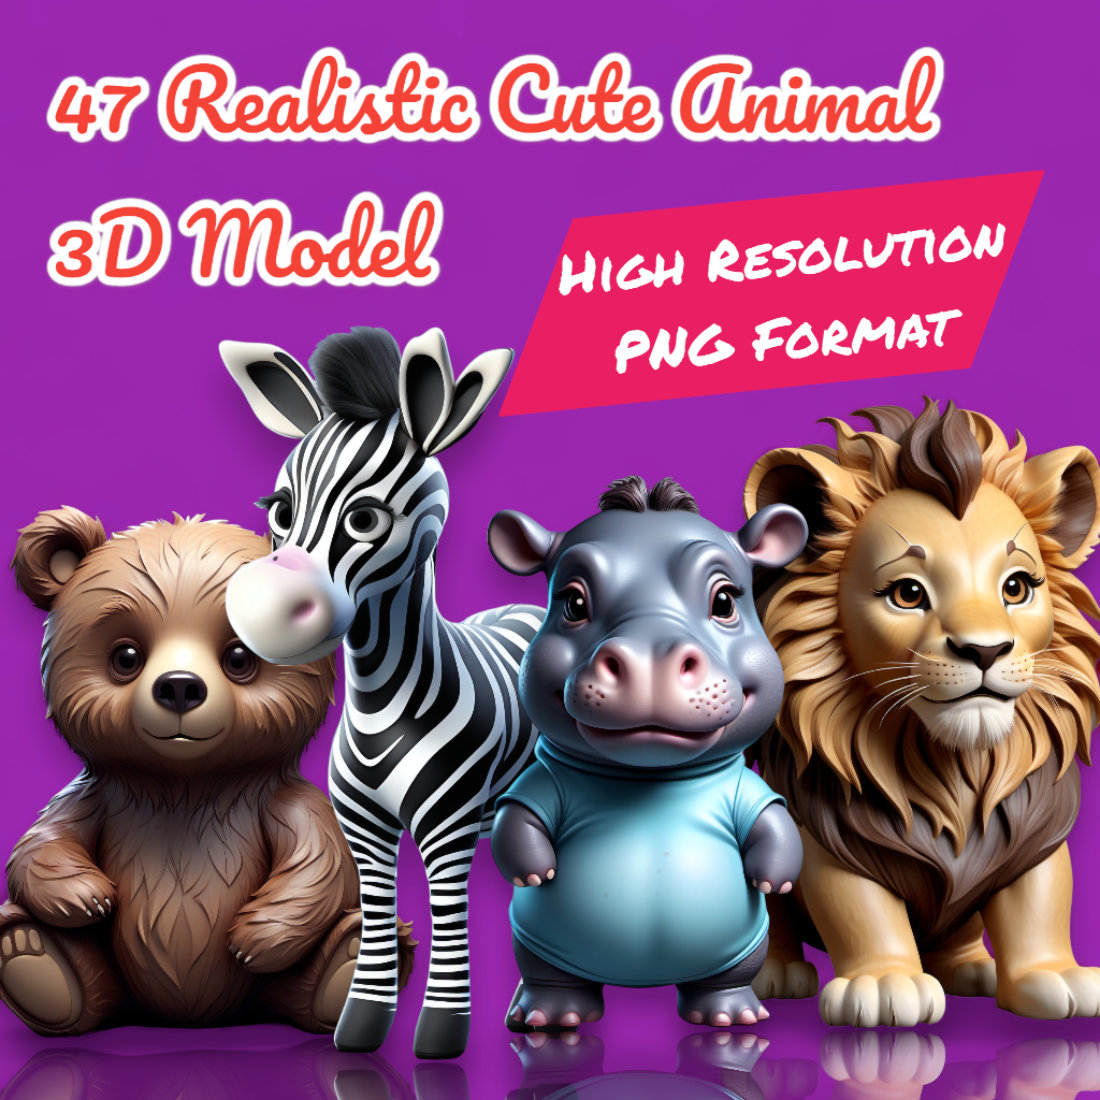 47 Realistic Cute Animal 3D Model High Resolution preview image.